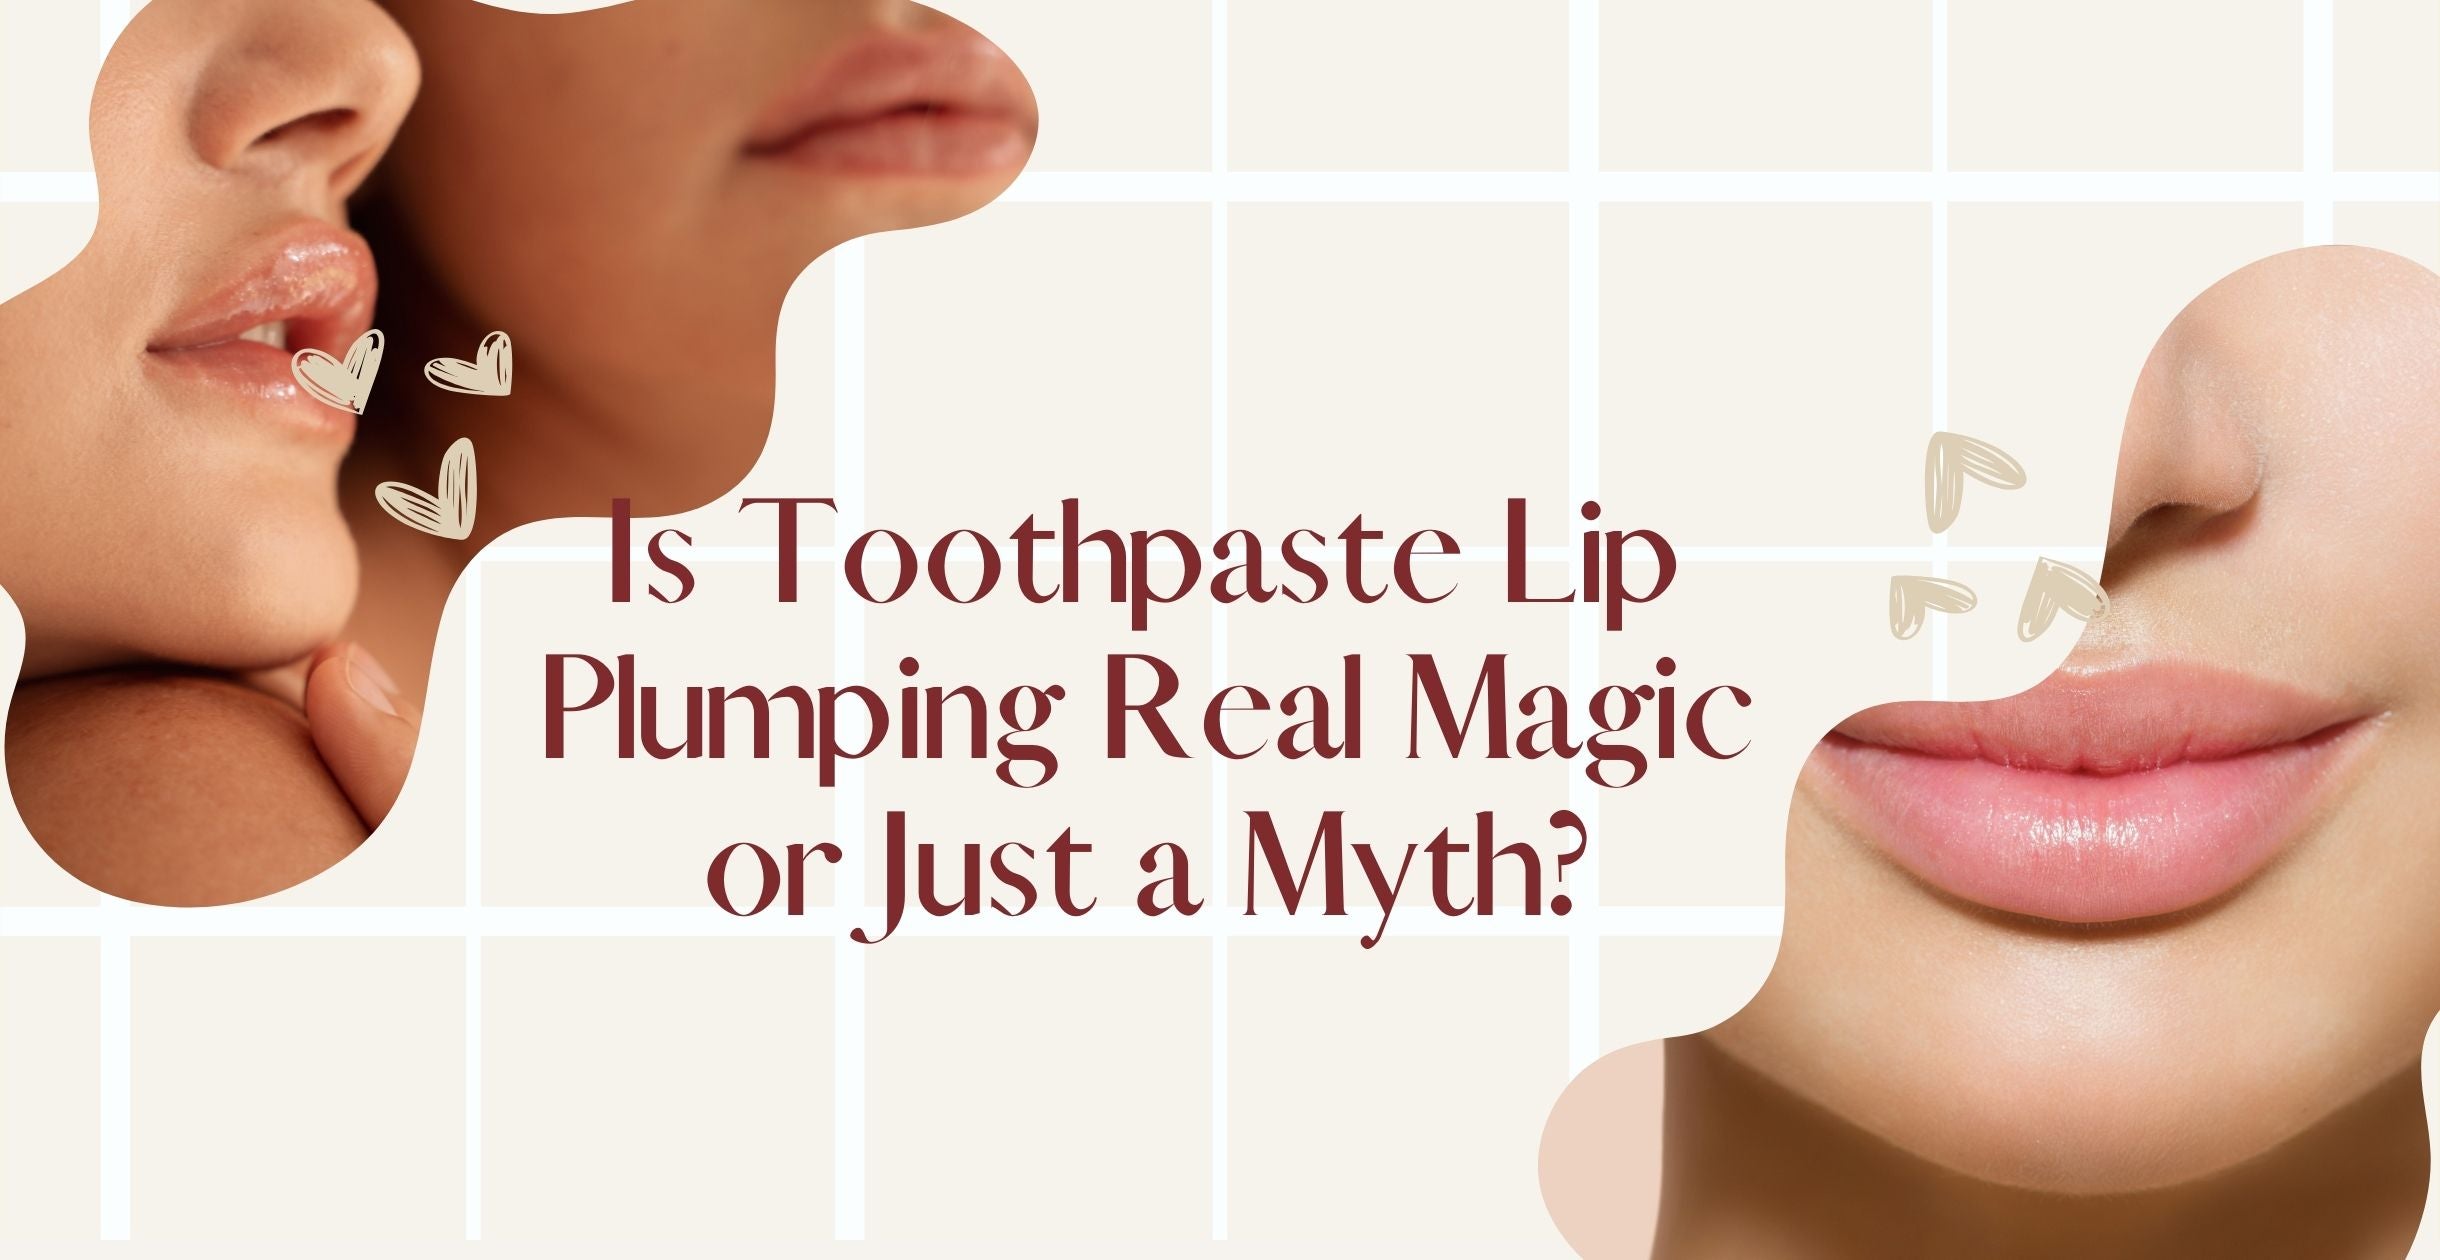 Is Toothpaste Lip Plumping Real Magic or Just a Myth?